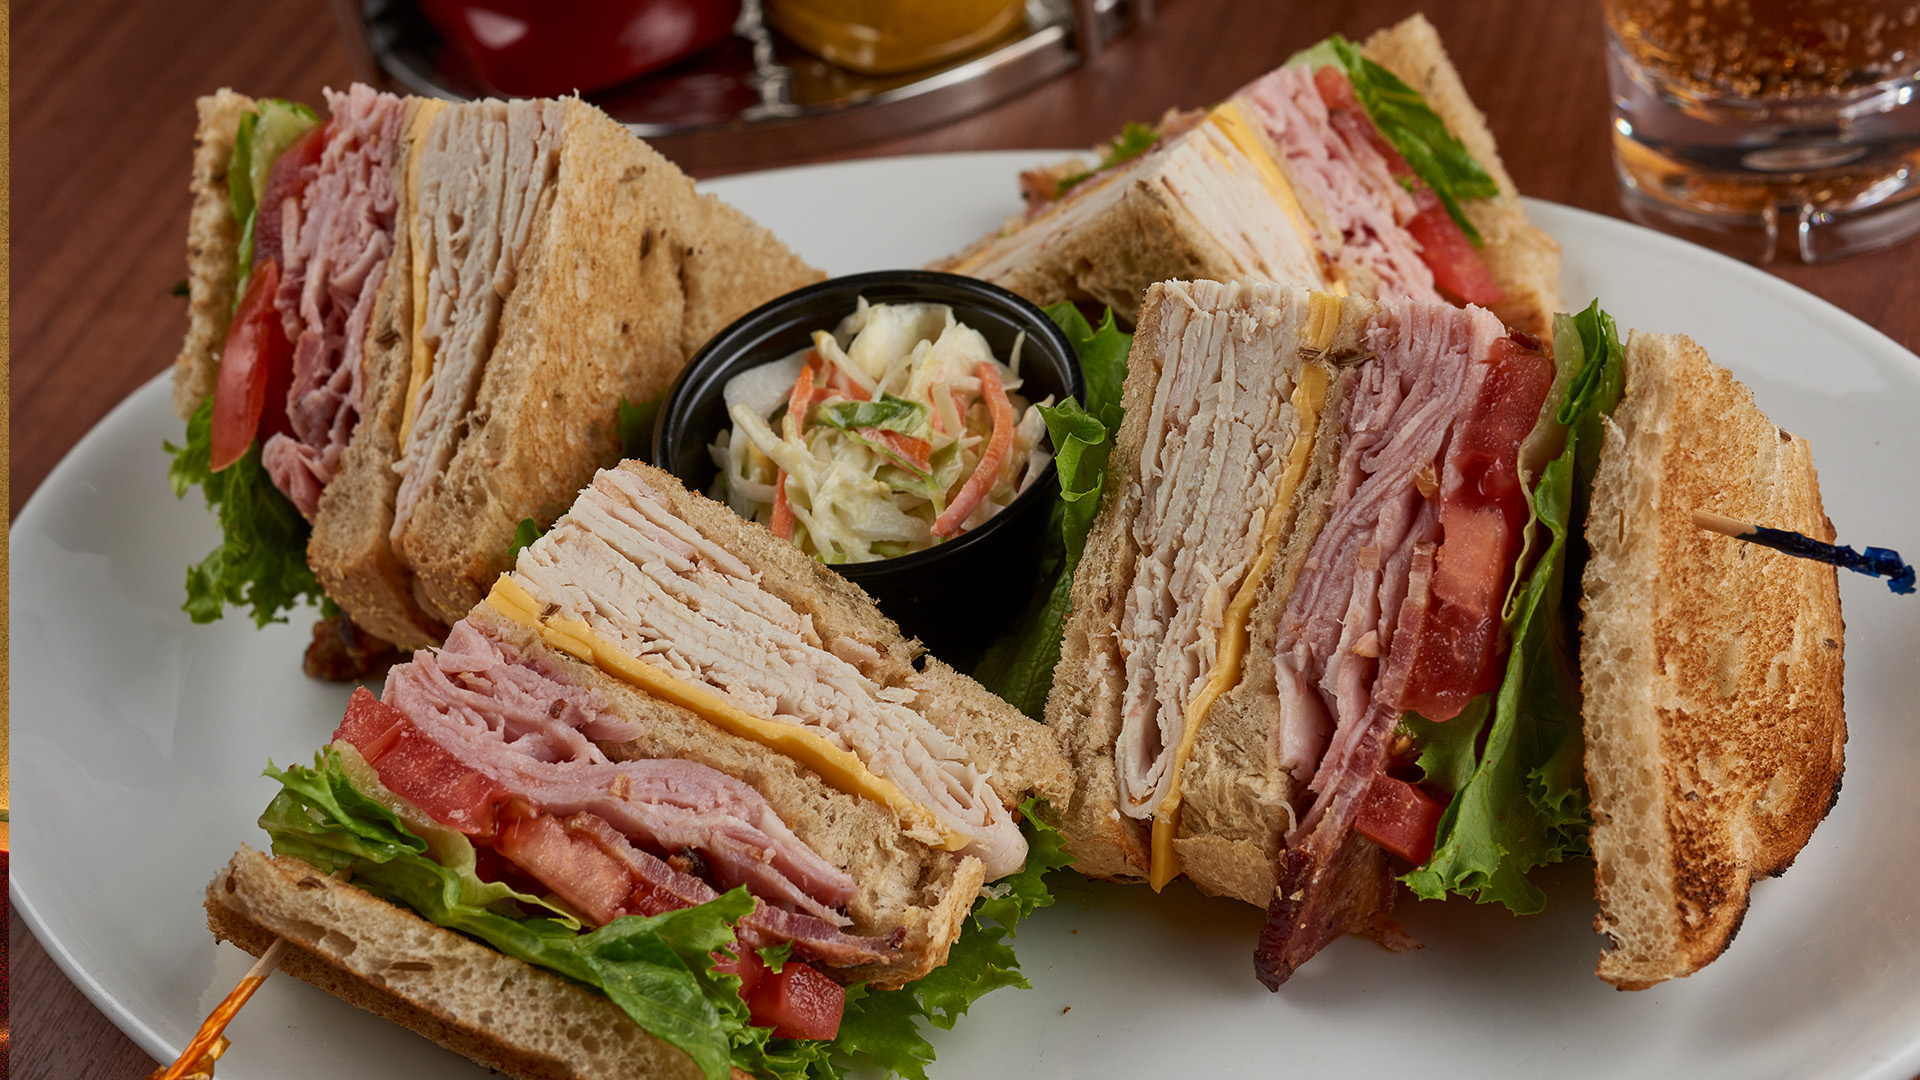 Club Sandwich. Myron’s Delicatessen® doles out an extra helping of New York culture complete with humor, artwork, and music along with the best corned beef, pastrami, and classic delicatessen fare. You’ll get your fill of fun and food, guaranteed. Find all the Myron Cohen slogans that decorate the delicatessen and the waitstaff’s uniforms, including his famous “Everybody gotta be someplace” and “It’s not a question."